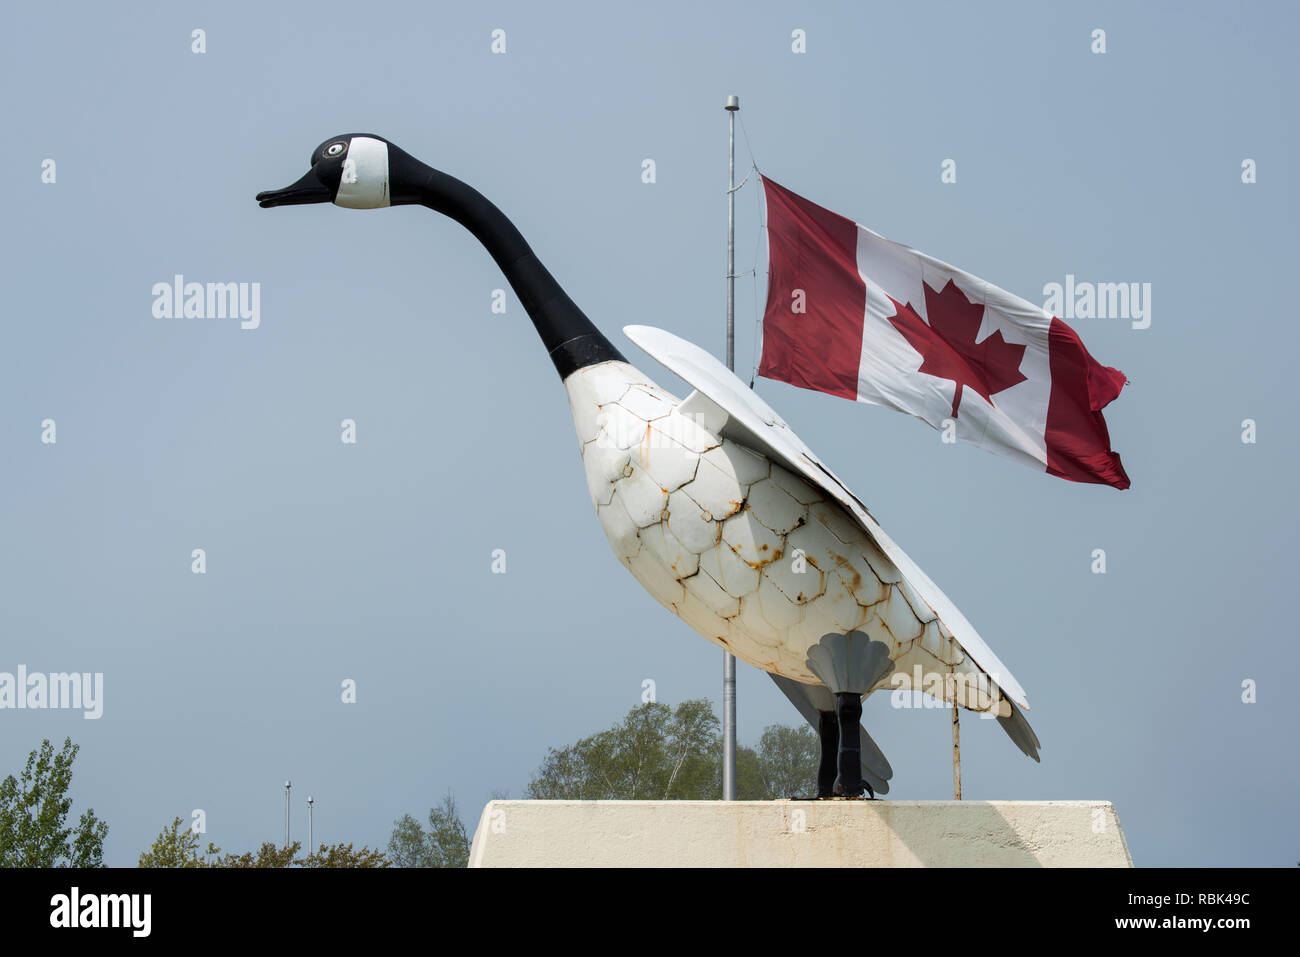 Wawa, Ontario, Canada.  The Wawa goose located at the Tourist Information Centre still stands as one of the major roadside attractions in Ontario. Stock Photo